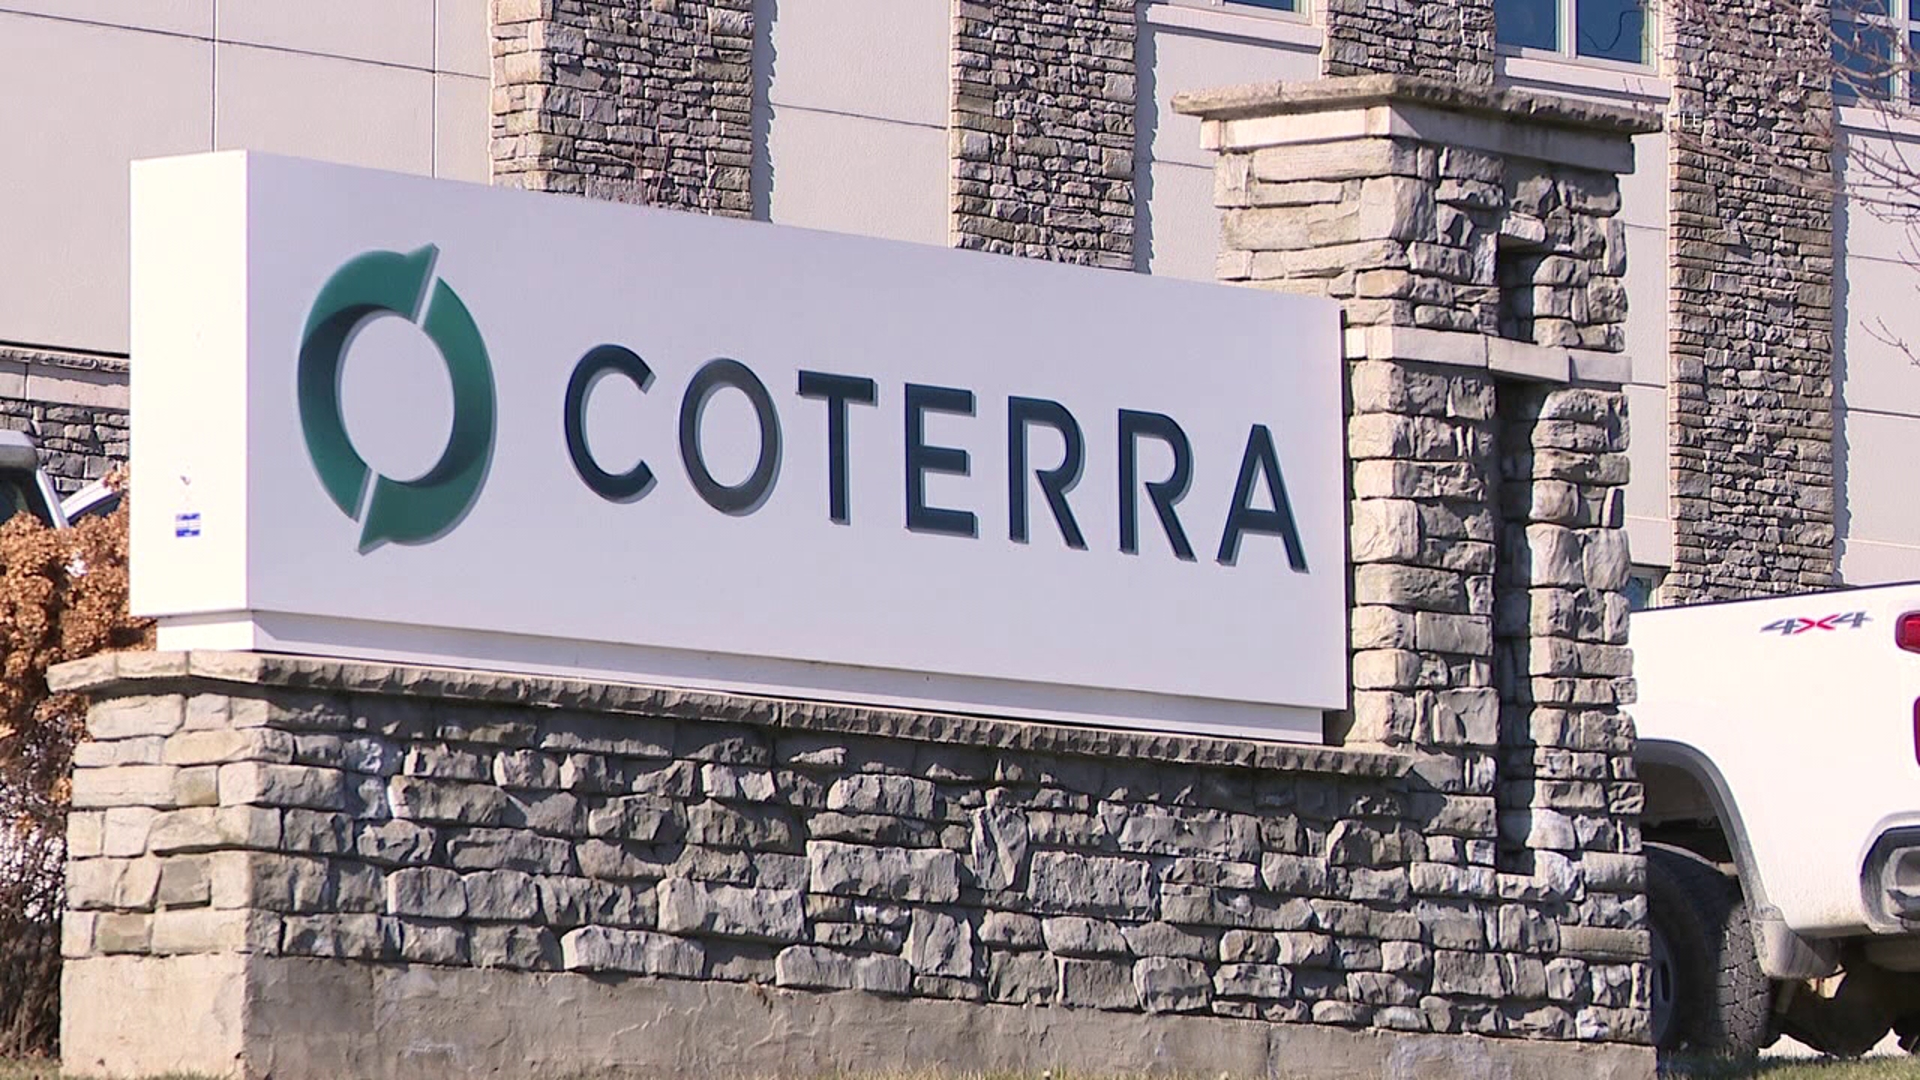 More than 50 employees were laid off after Coterra Energy announced on Thursday that it's closing the GDS Lenox facility.